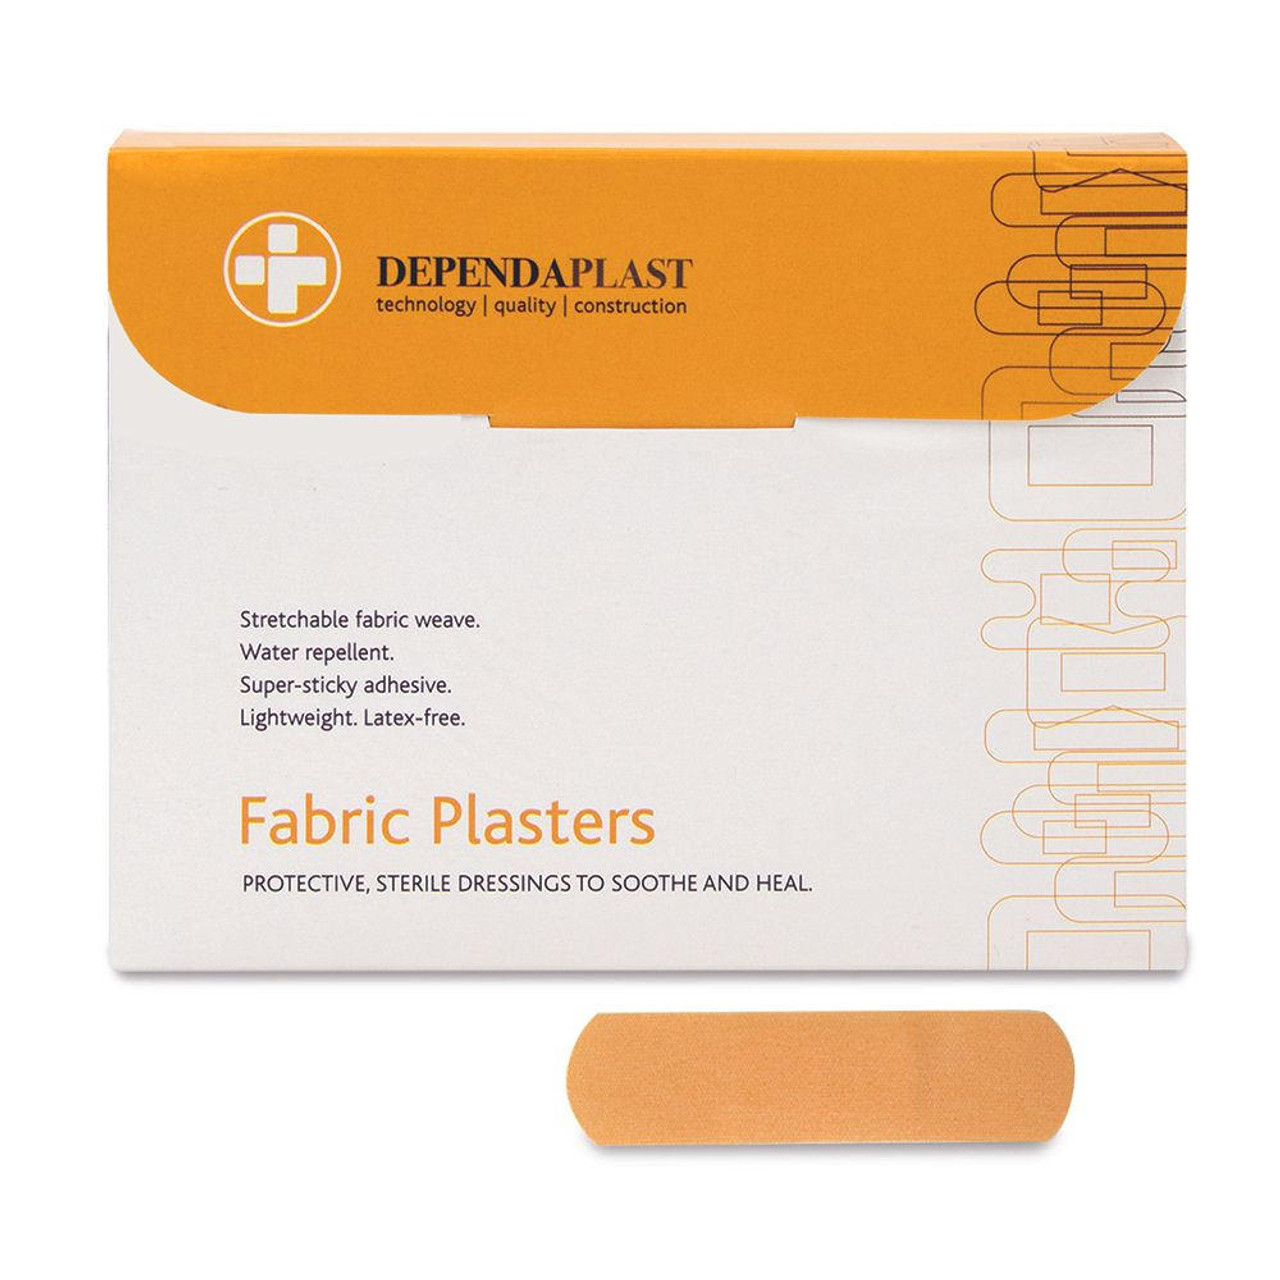  Fabric Plasters Advanced with High Quality Adhesive Dependaplast 